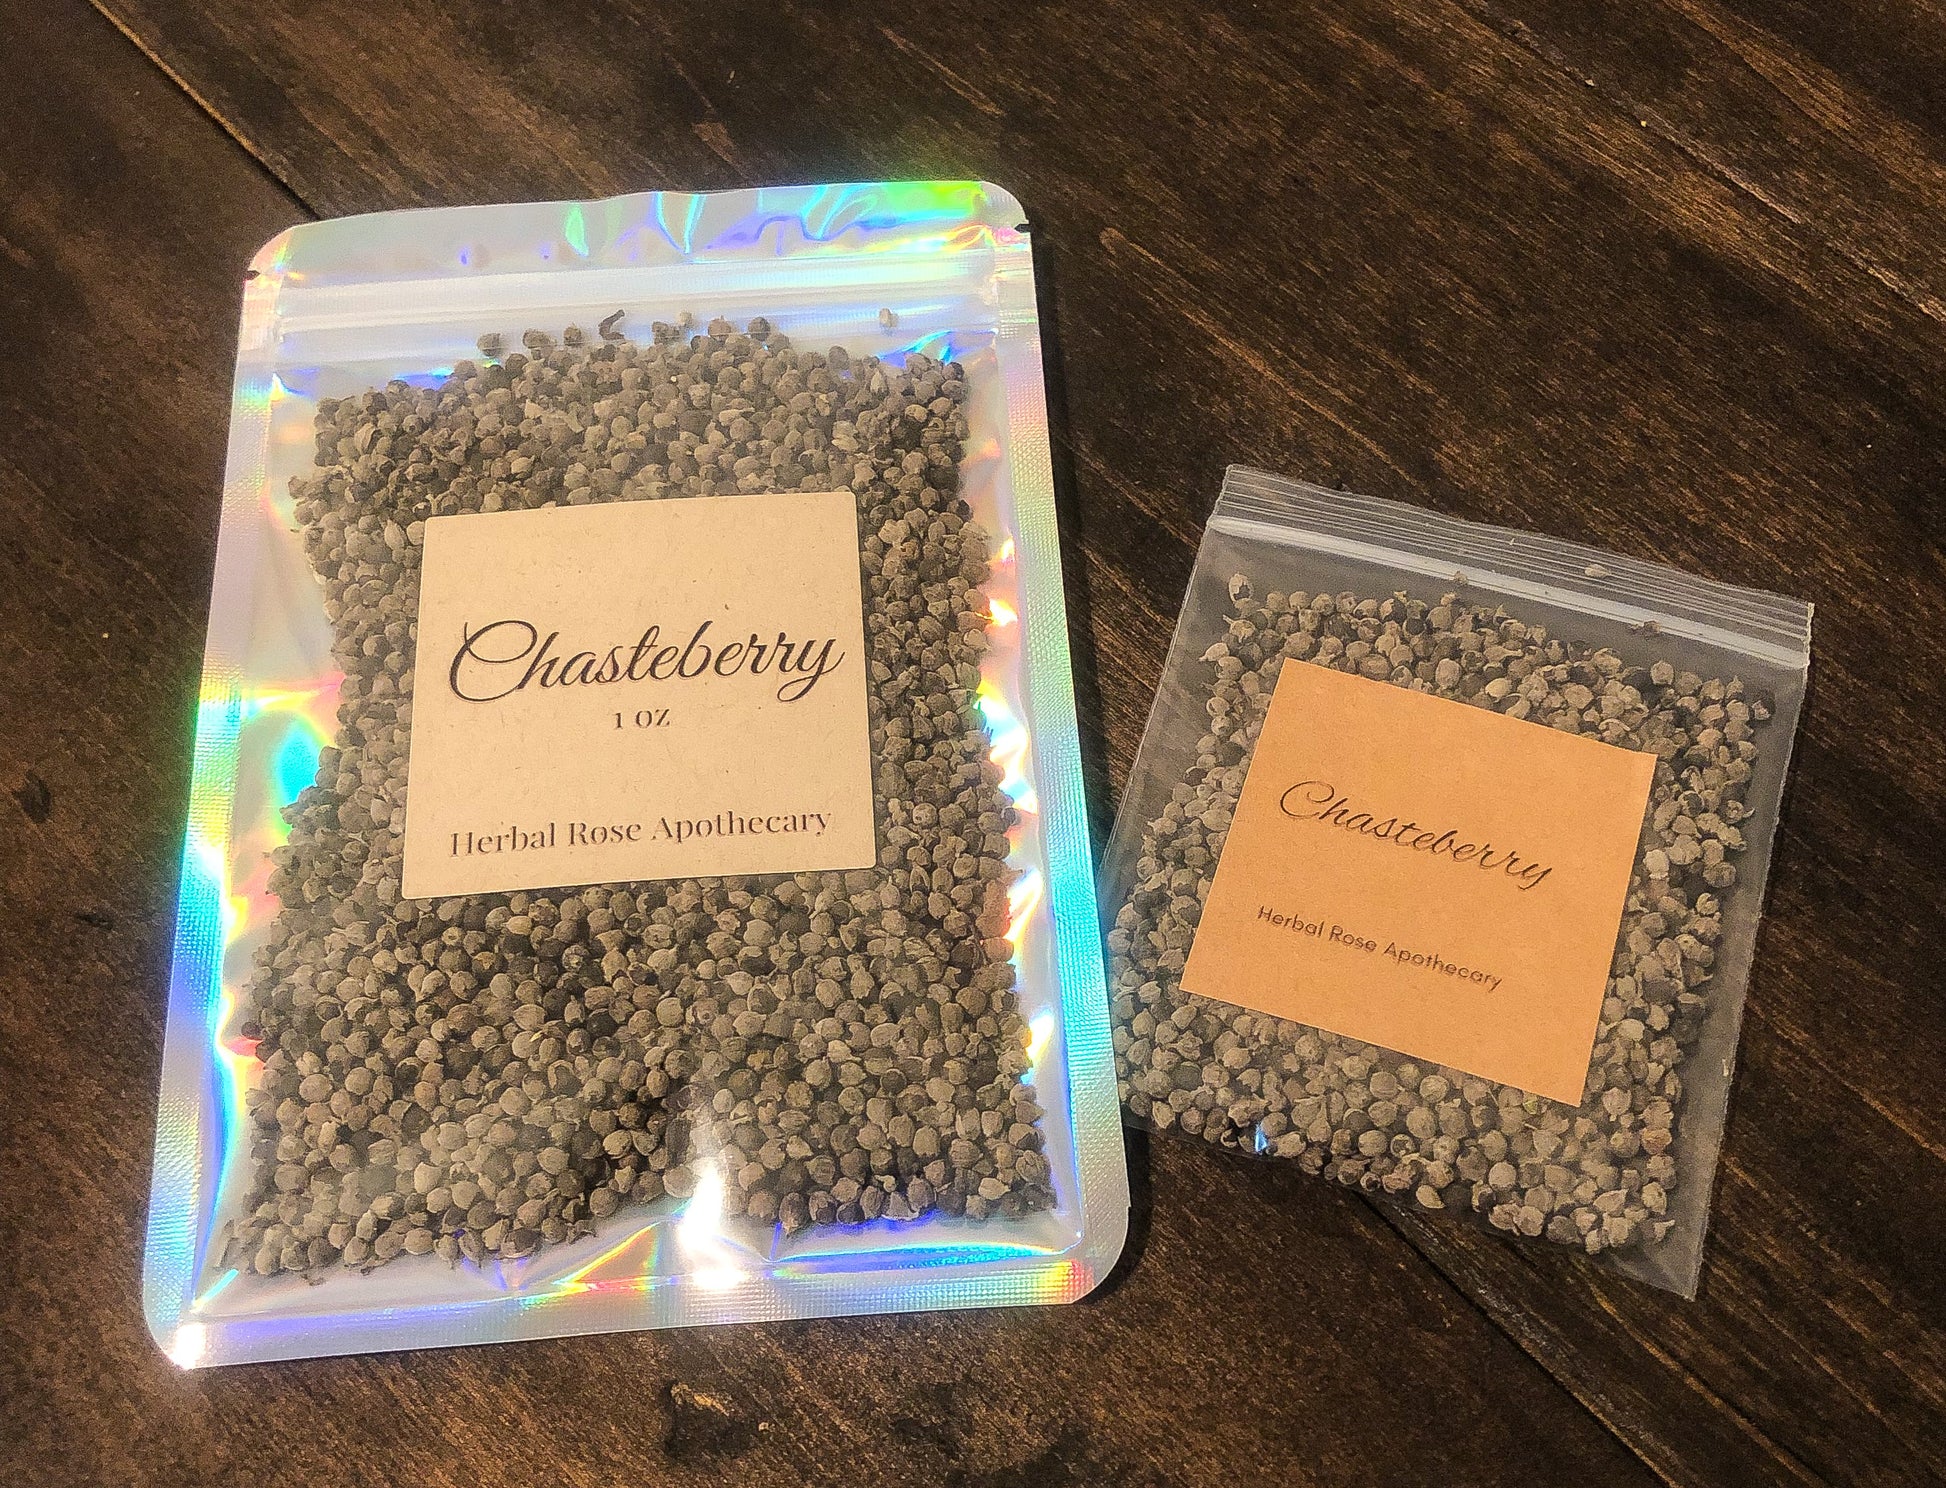 chasteberry 8g and 1oz in clear bags on wooden background